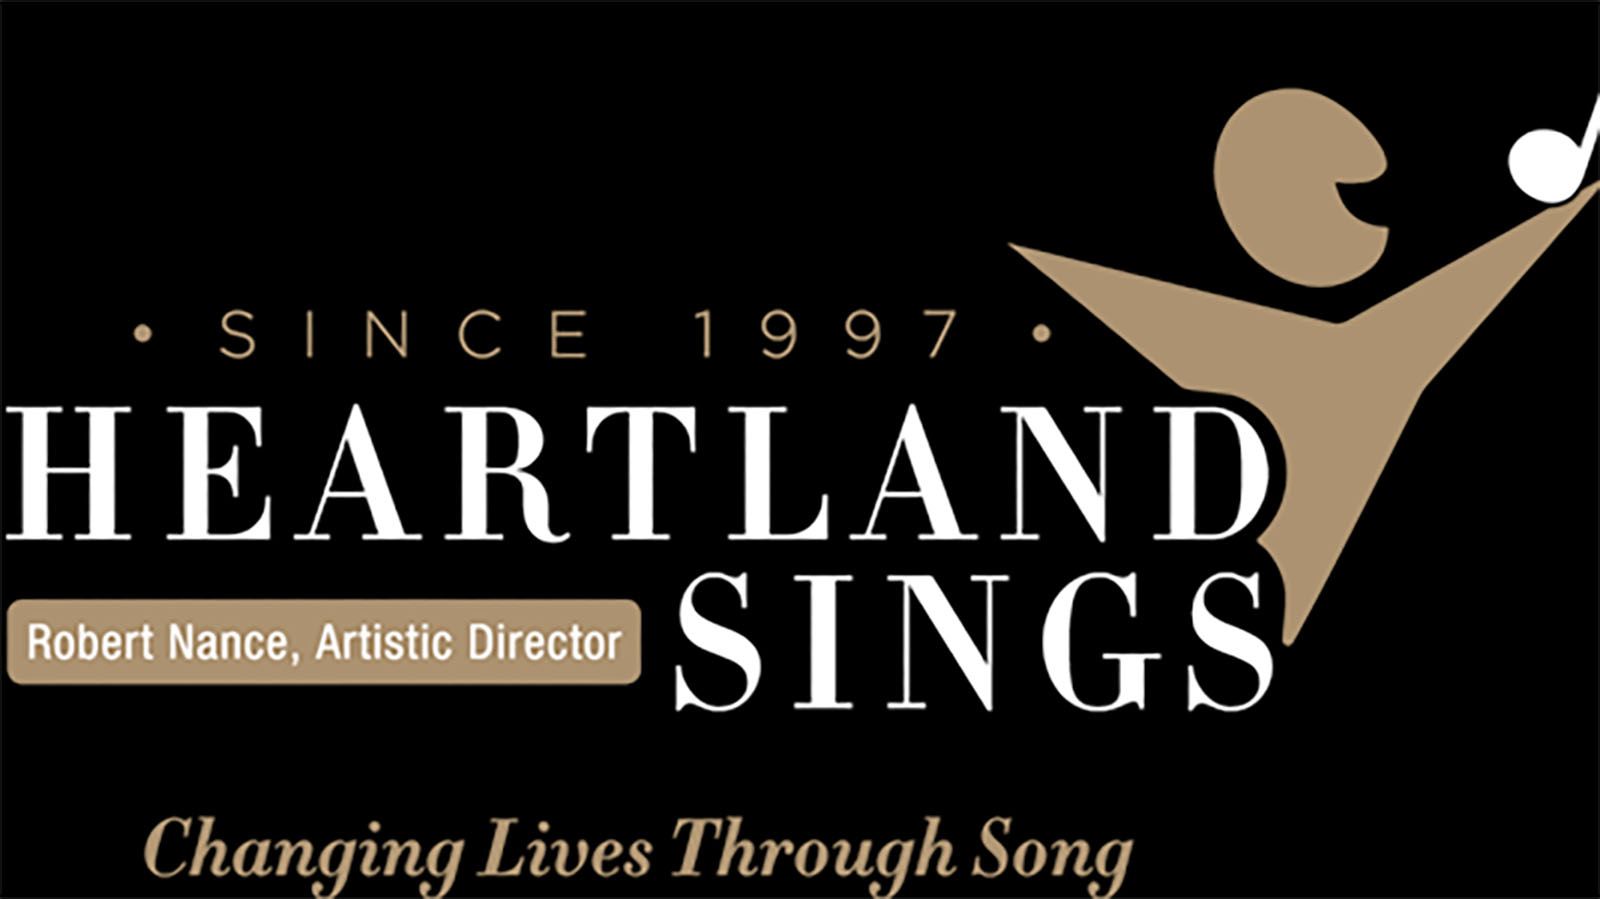 Heartland Sings will present Splashes of Color: A Celebration of Jazz on June 24.